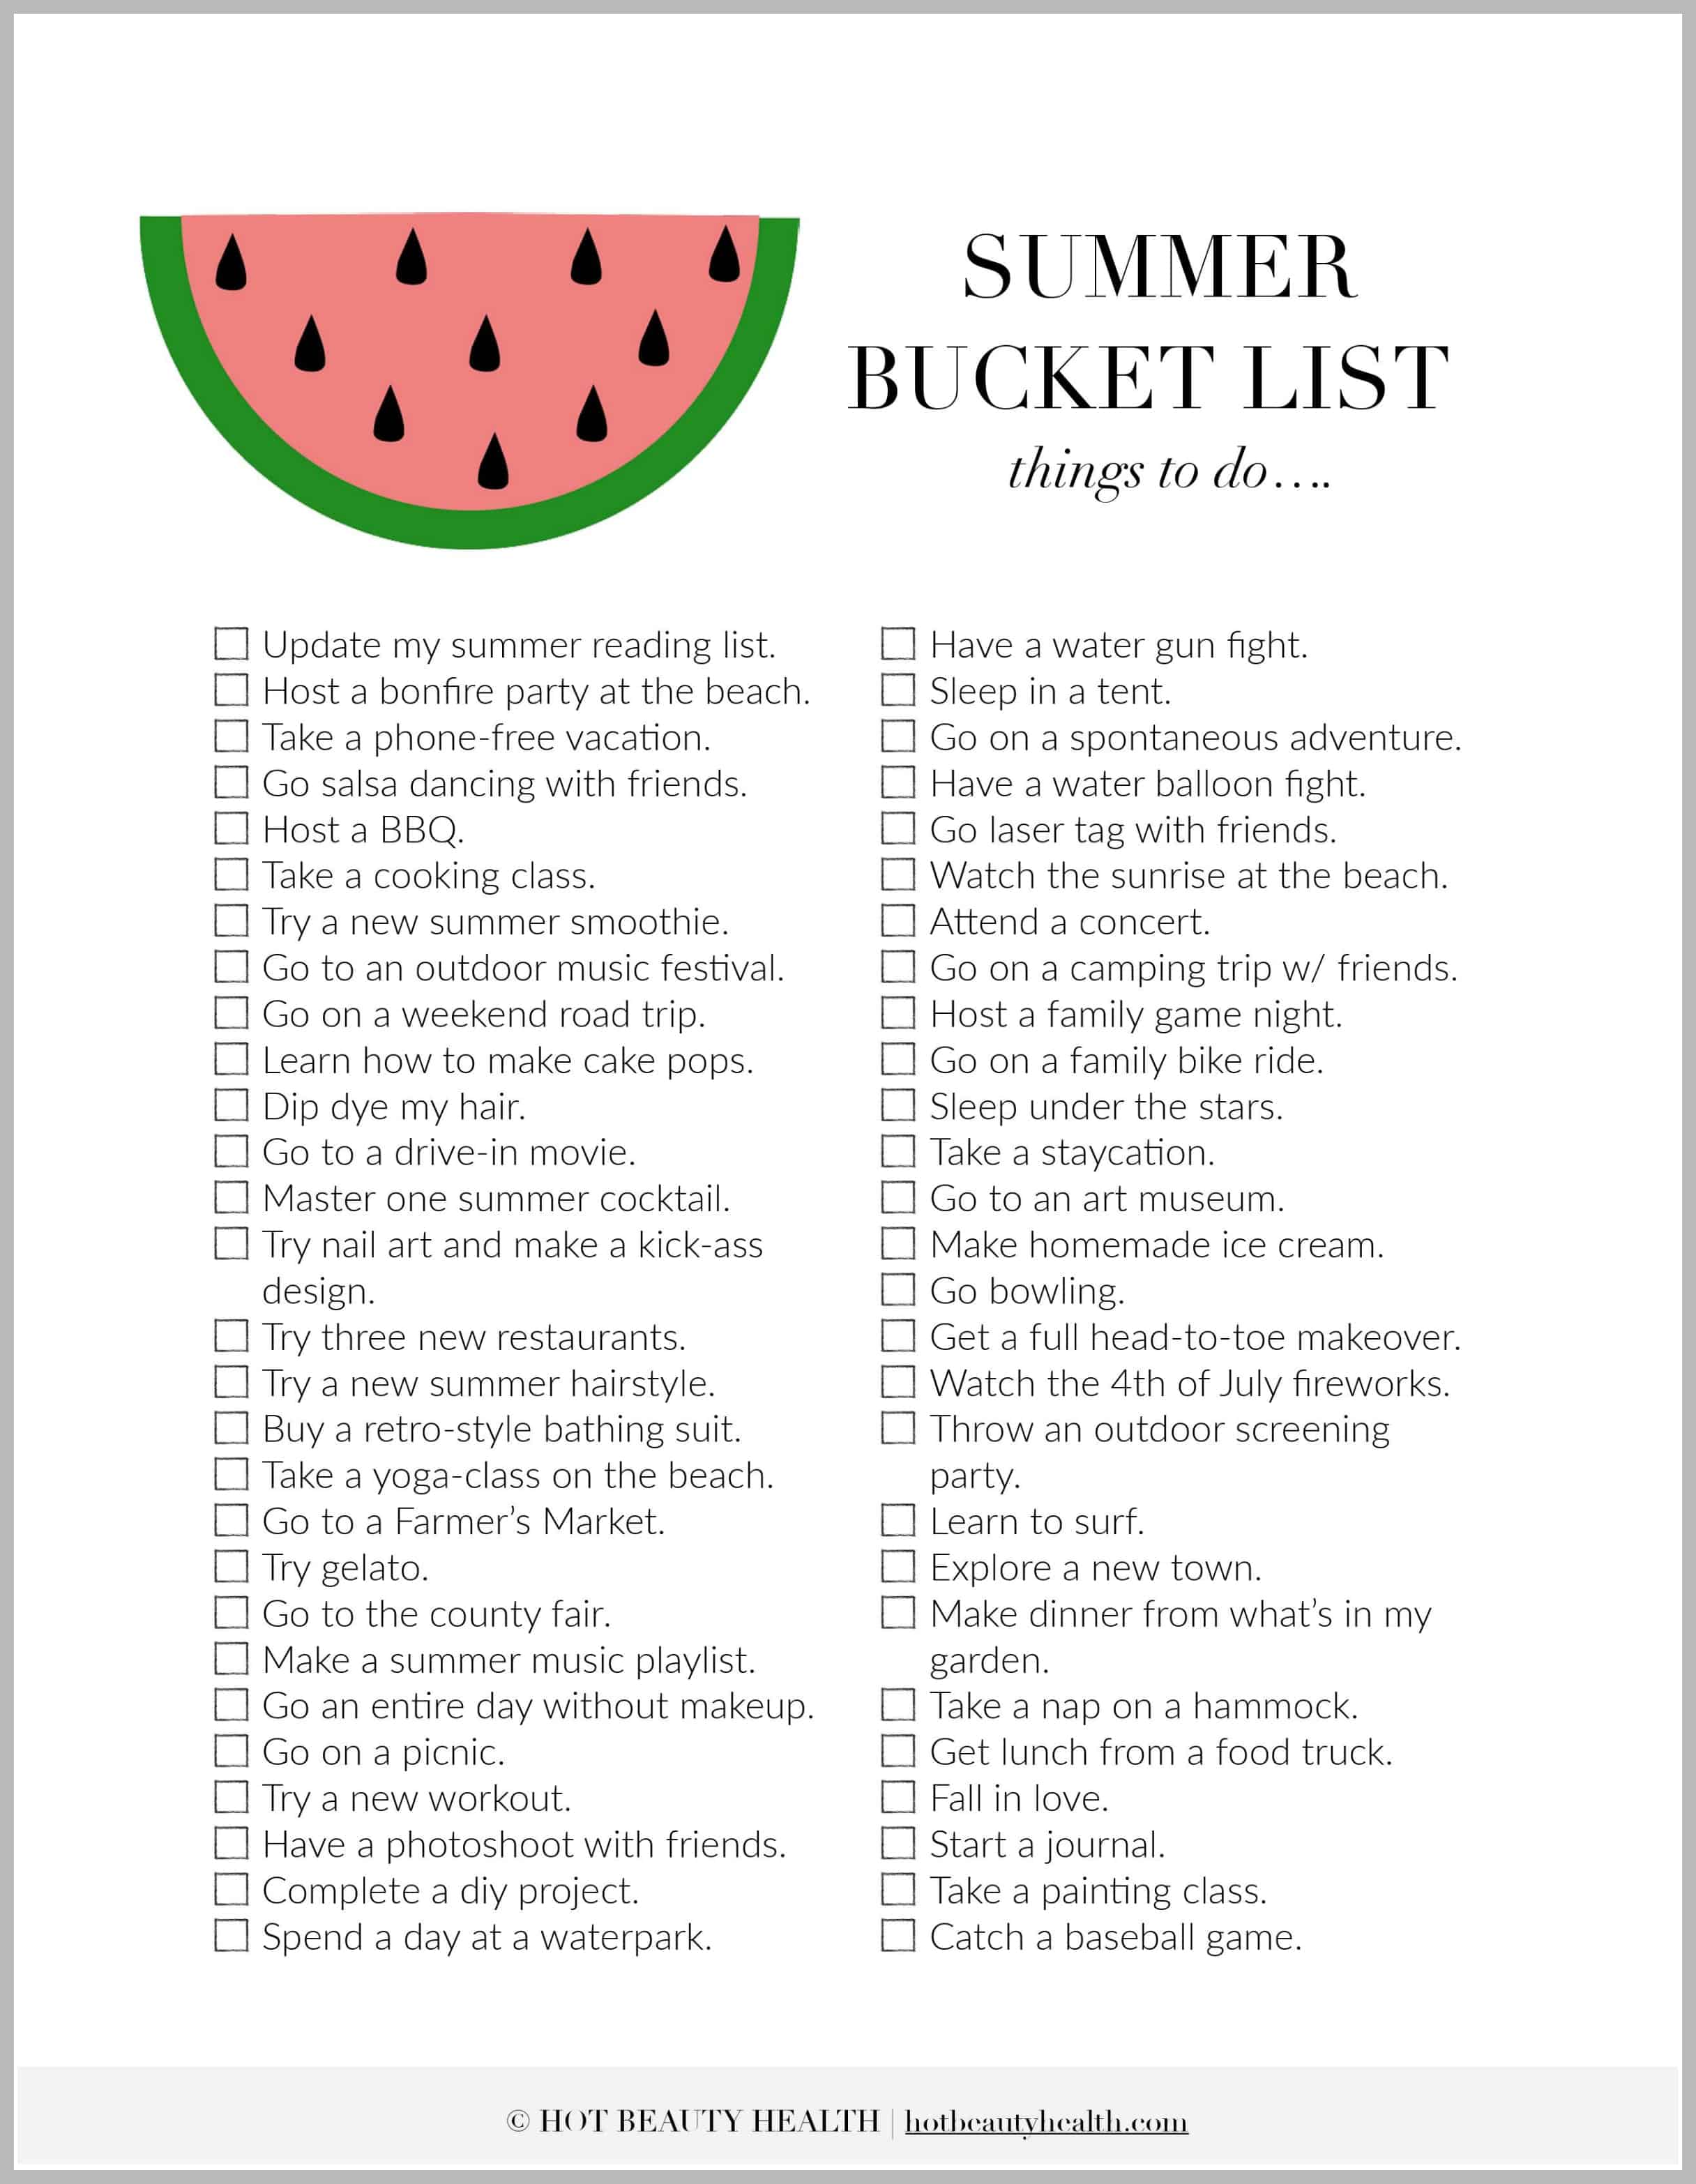 The Ultimate Summer Bucket List for teens, kids, and best friends with over 50 fun ideas and activities. Click over to download and print out this checklist!